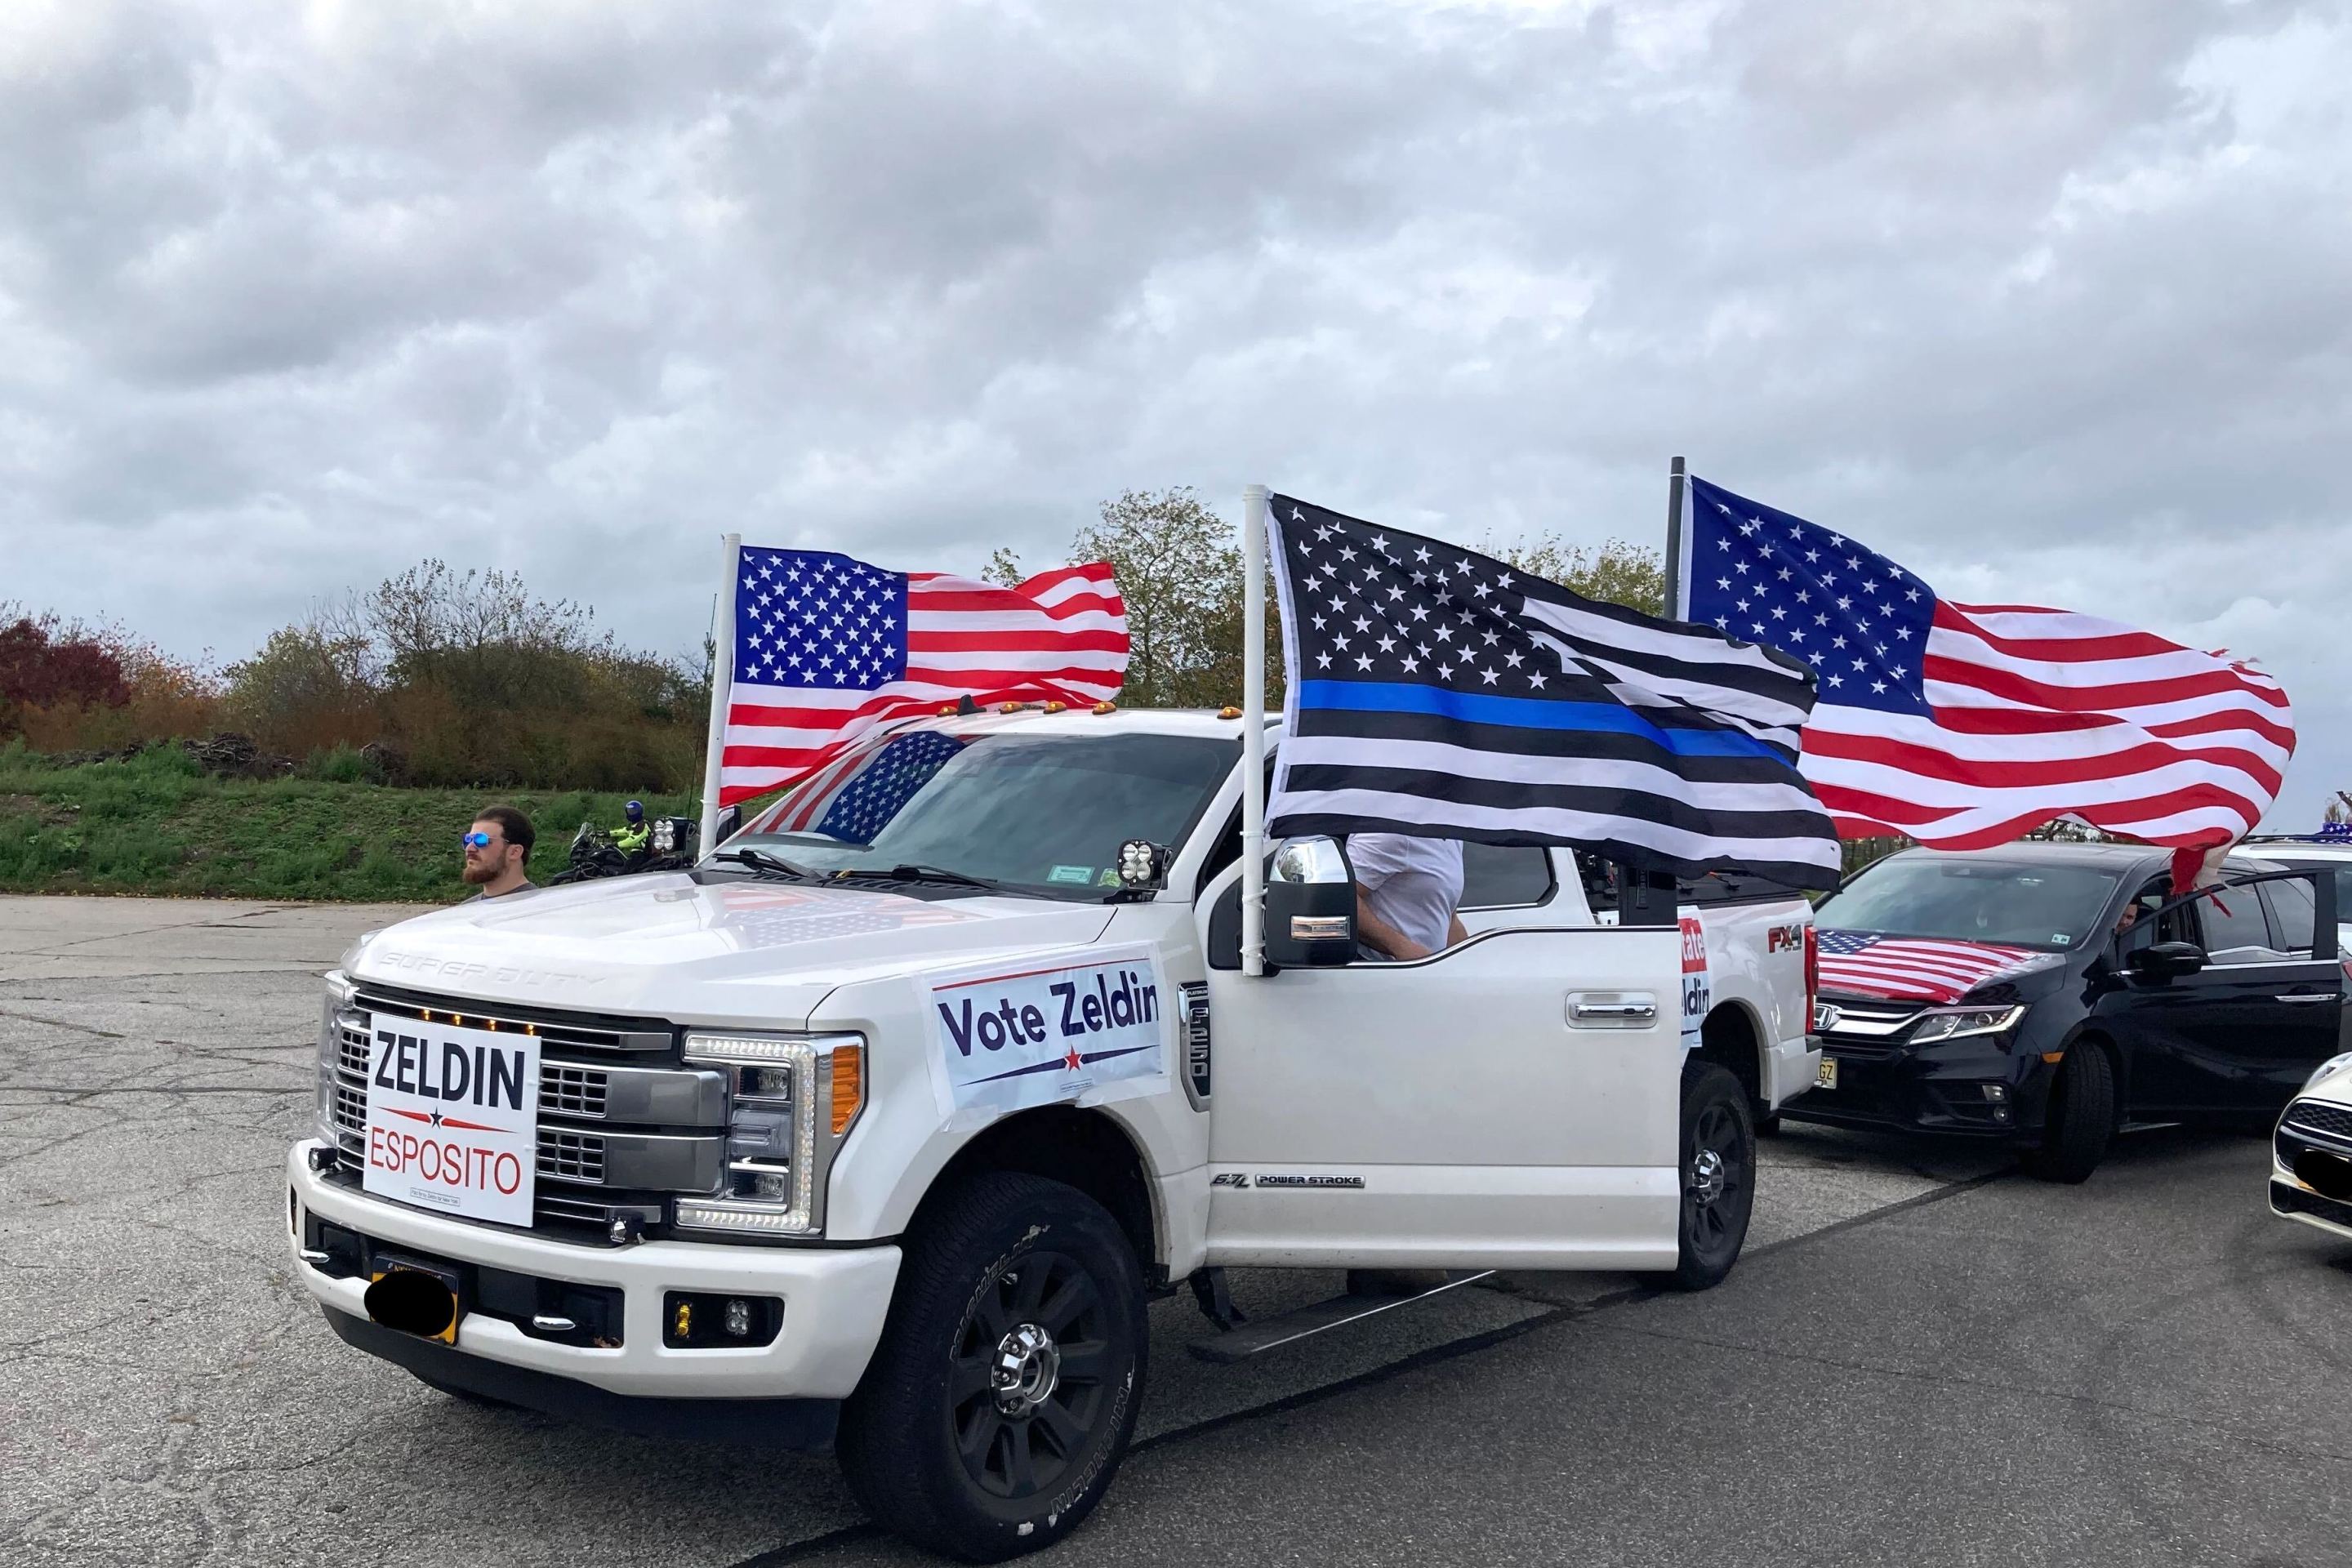 A huge white Ford pickup truck sporting American flags and Thin Blue Line flags and Lee Zeldin posters.